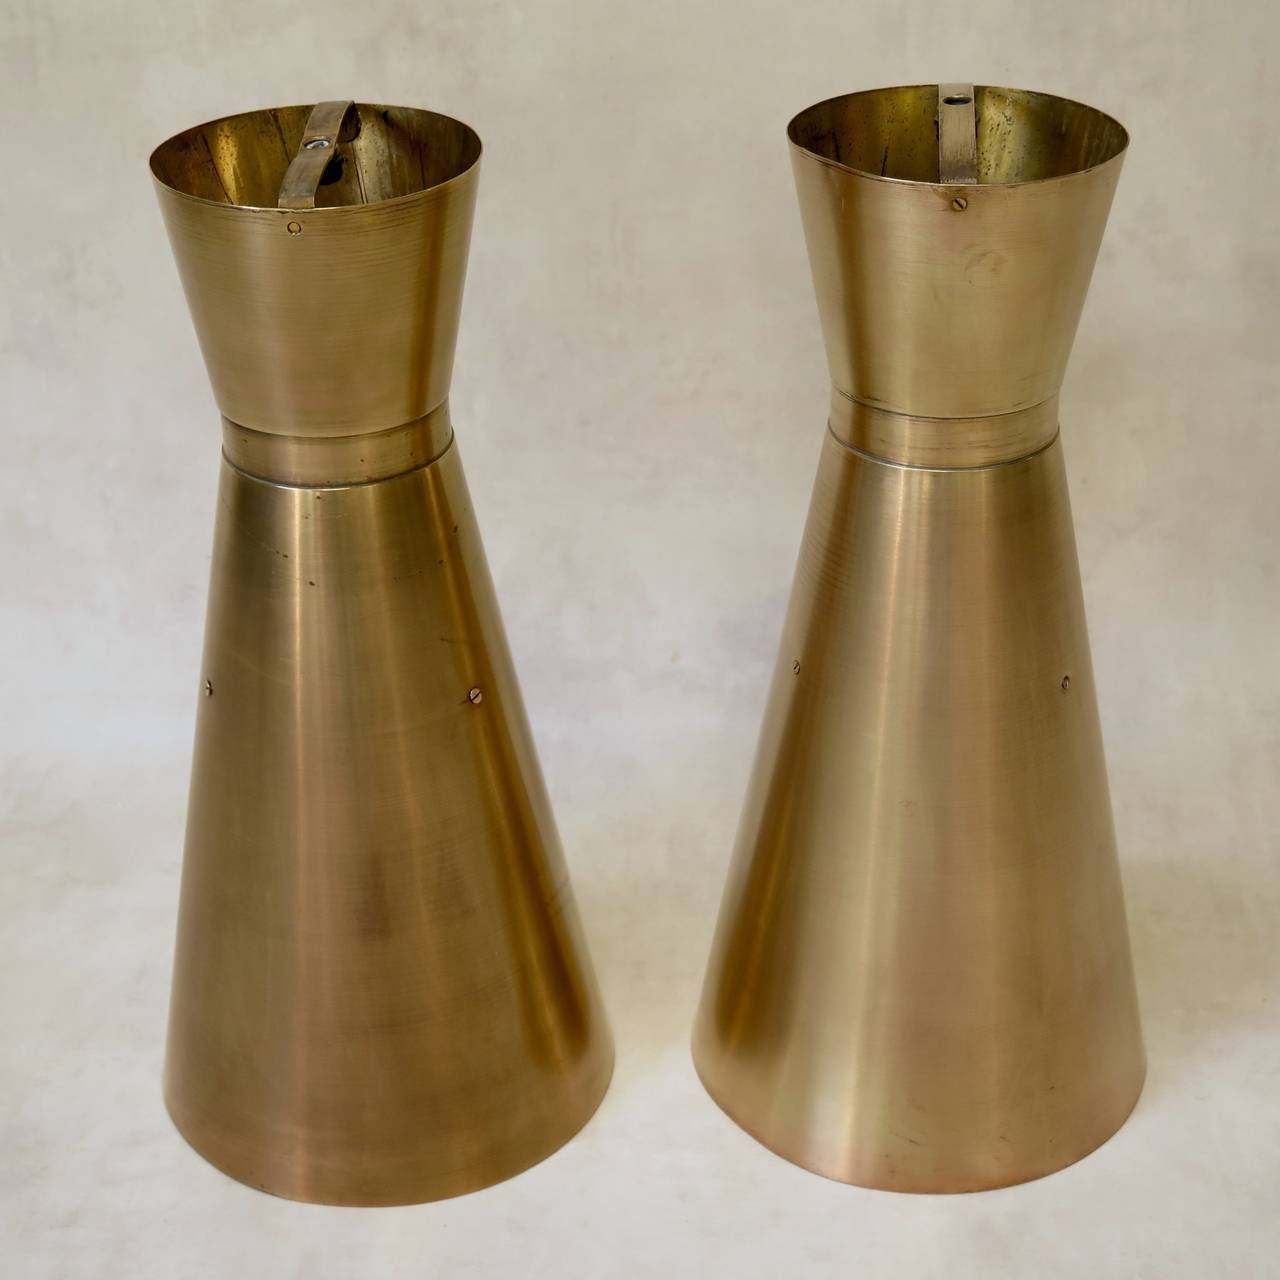 Elegant and sleek set of seven heavy, solid brass hanging lights of conical shape. Two sockets inside for uplight and downlight. Very well made.

The diameter provided below corresponds to the larger end. The smaller top end has a diameter of 15.5